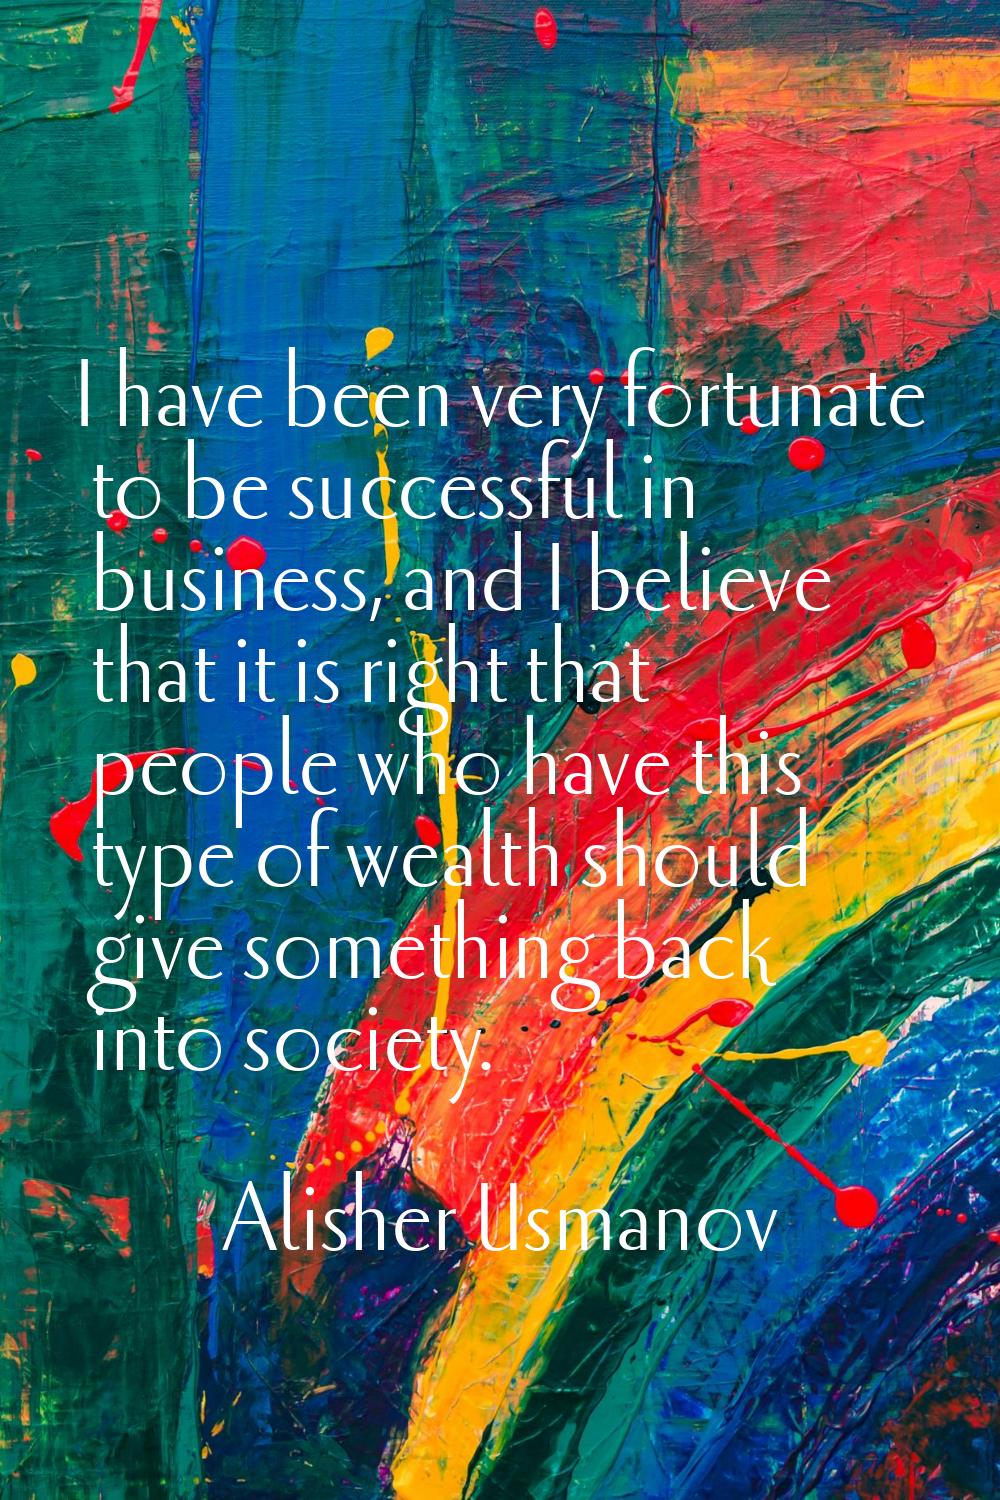 I have been very fortunate to be successful in business, and I believe that it is right that people